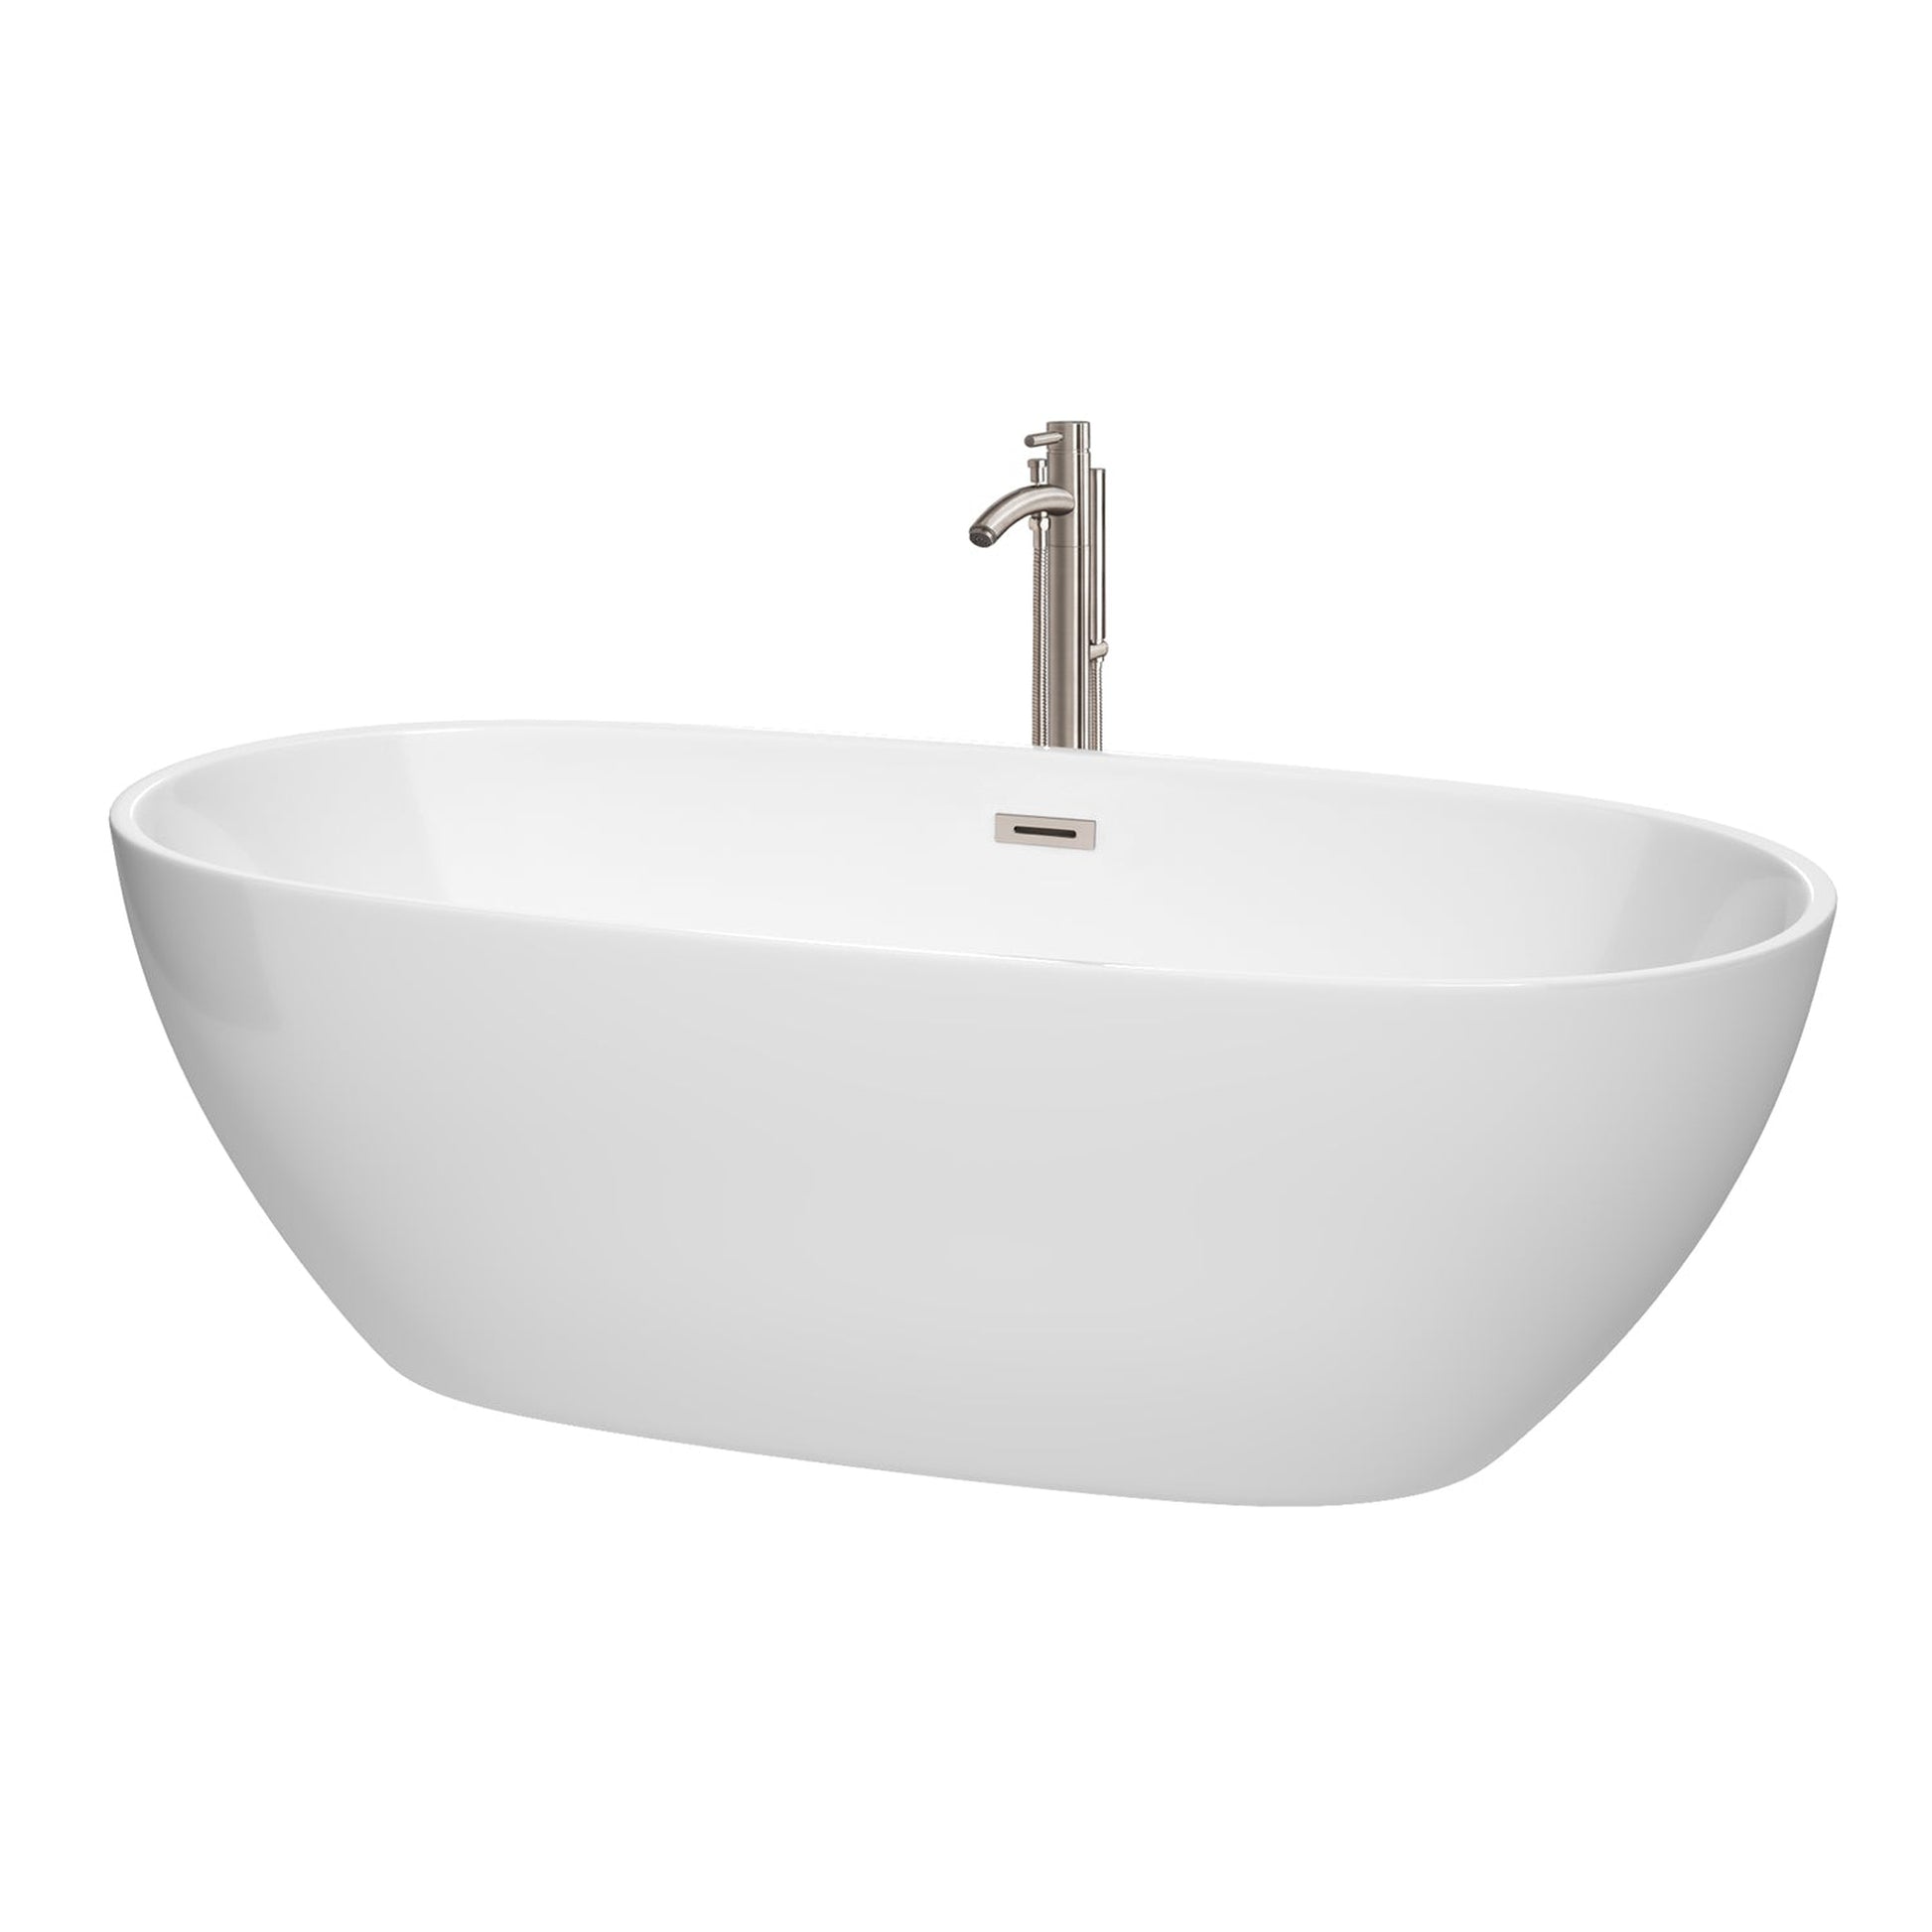 Wyndham Collection Juno 71" Freestanding Bathtub in White With Floor Mounted Faucet, Drain and Overflow Trim in Brushed Nickel